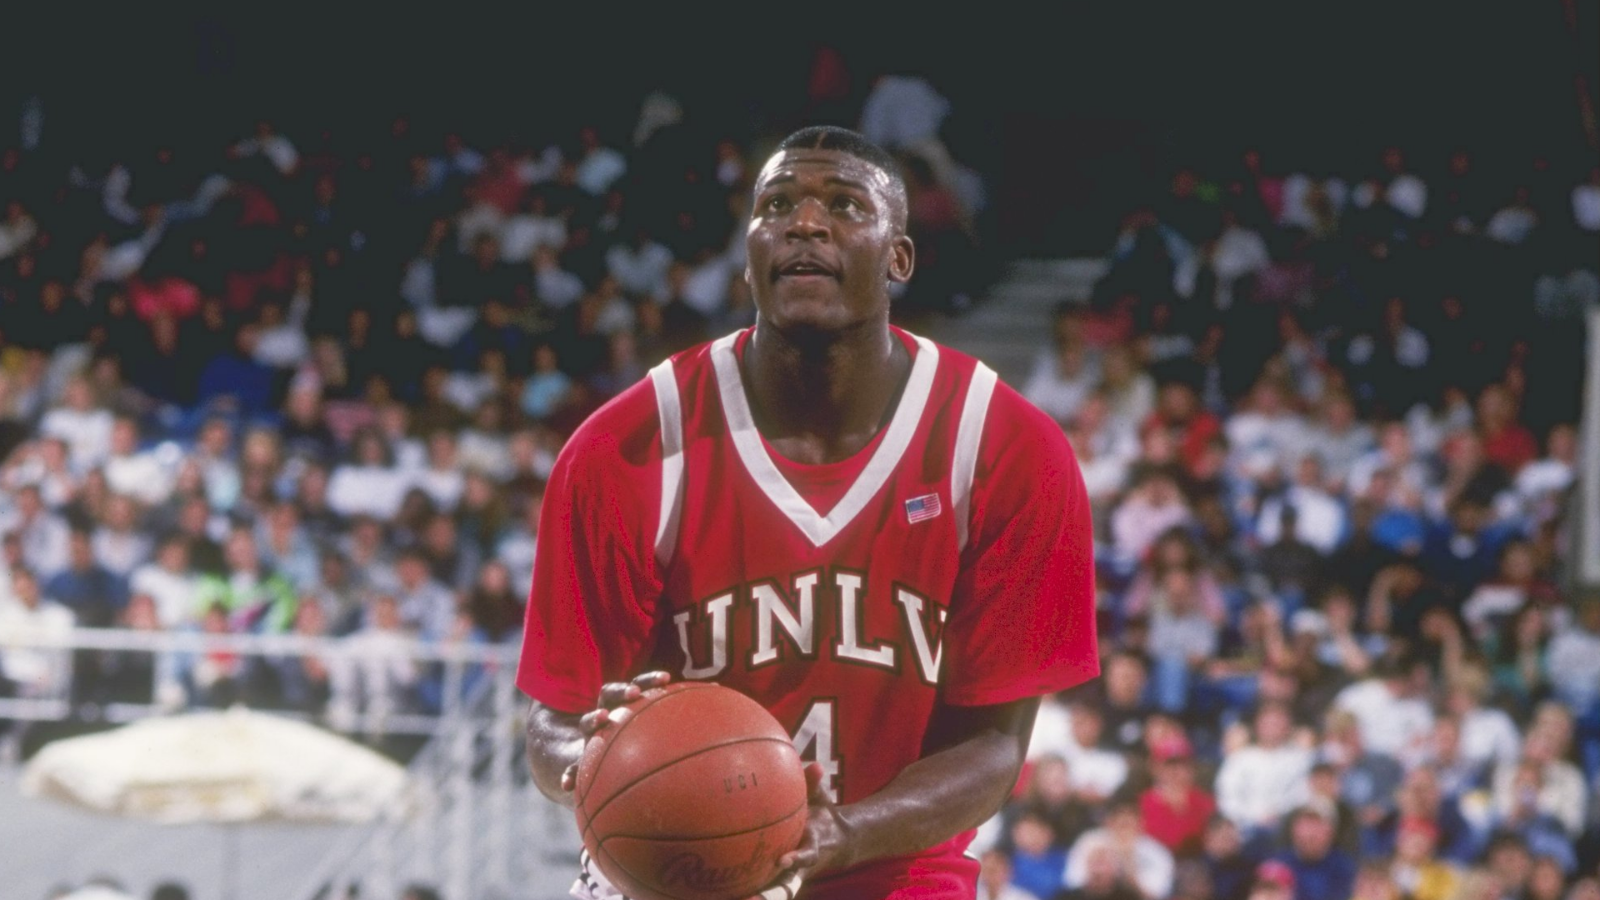 The Larry Johnson UNLV Running Rebels jersey is now available in